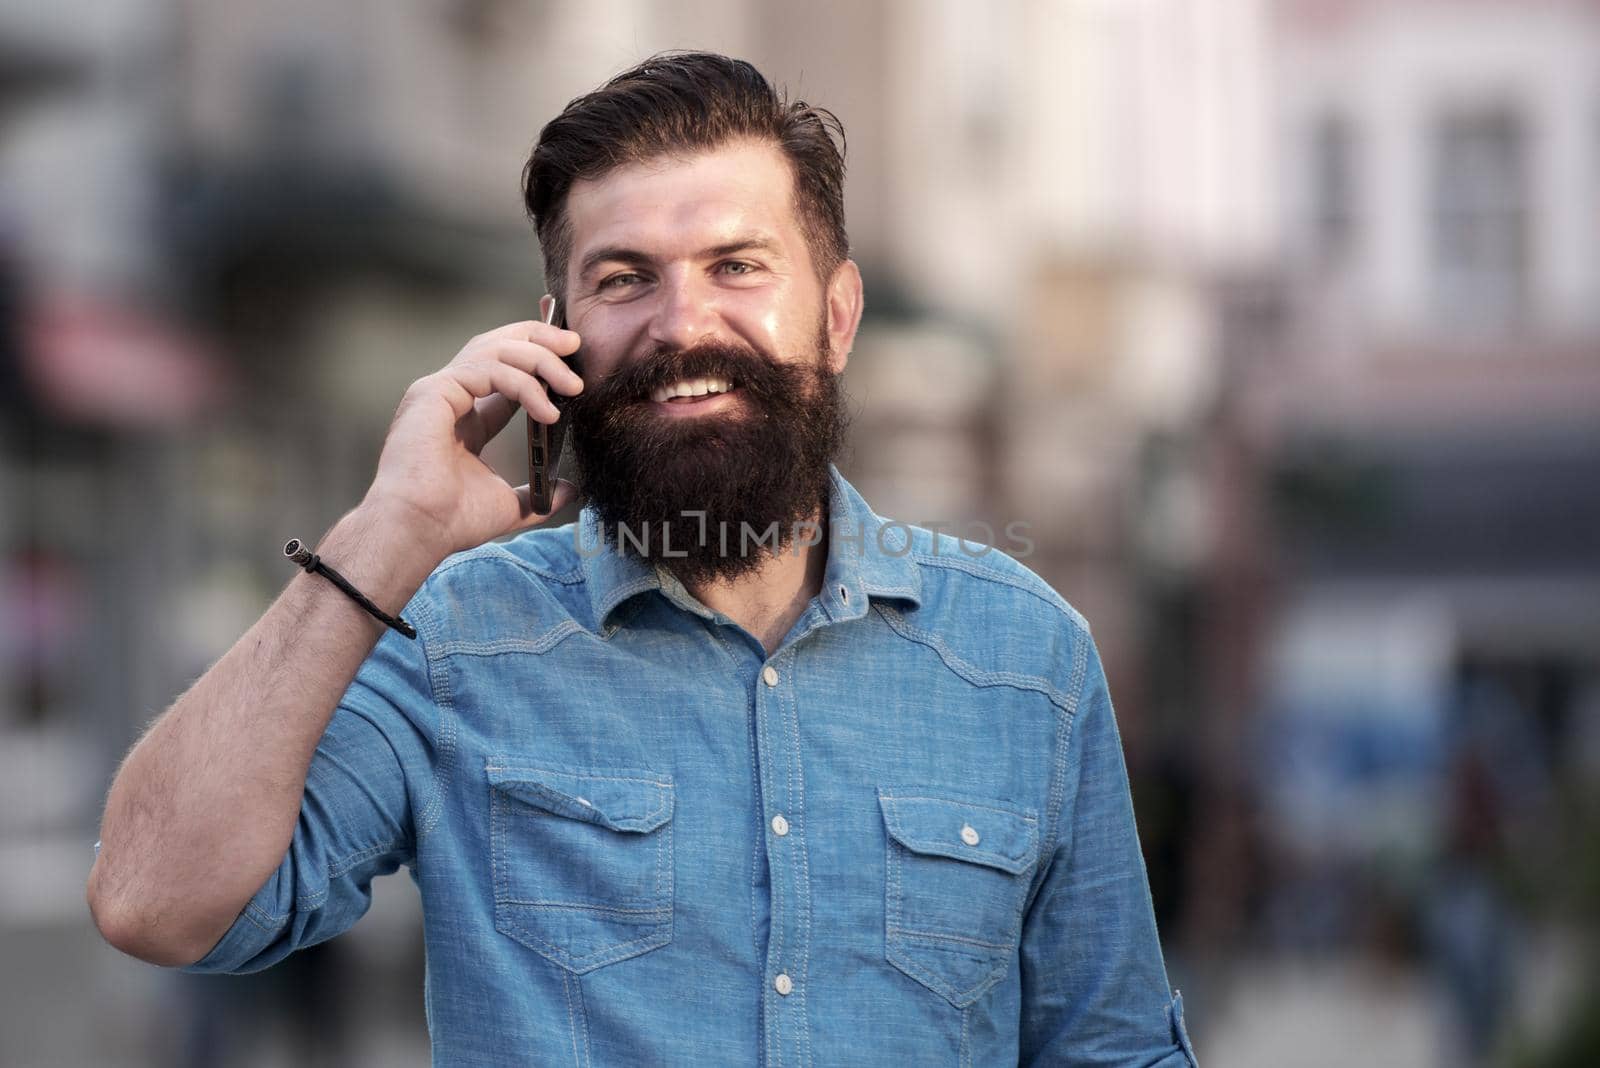 Smiling man call phone and smile outdoor city street. Happy businessman in casual blue shirt talking on mobile